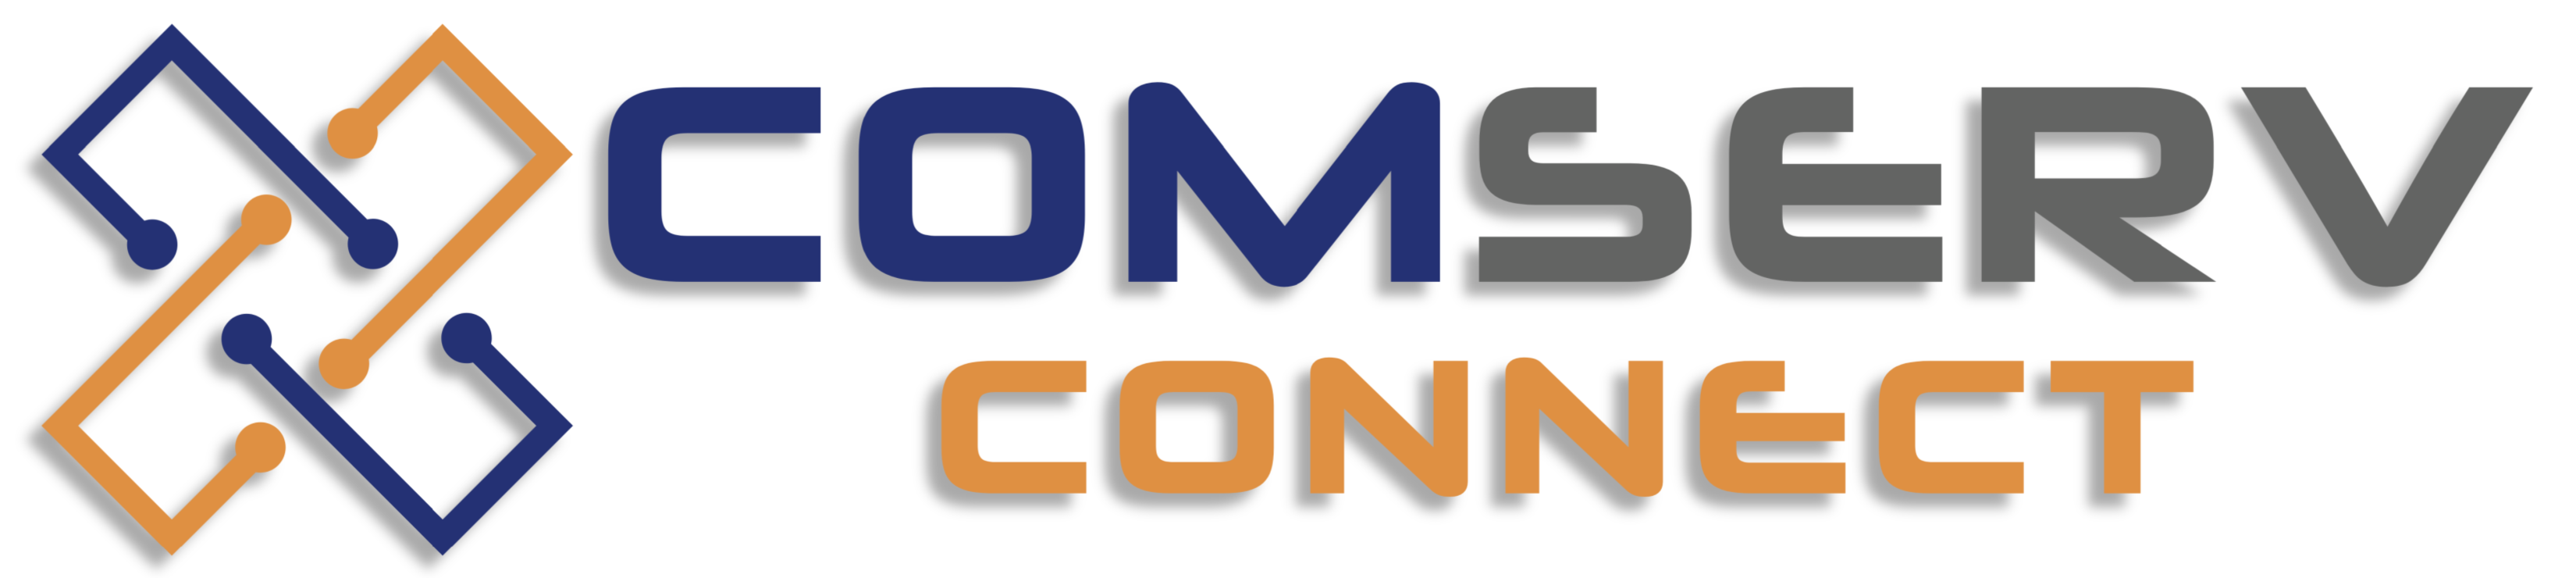 Comserv Connect Inc